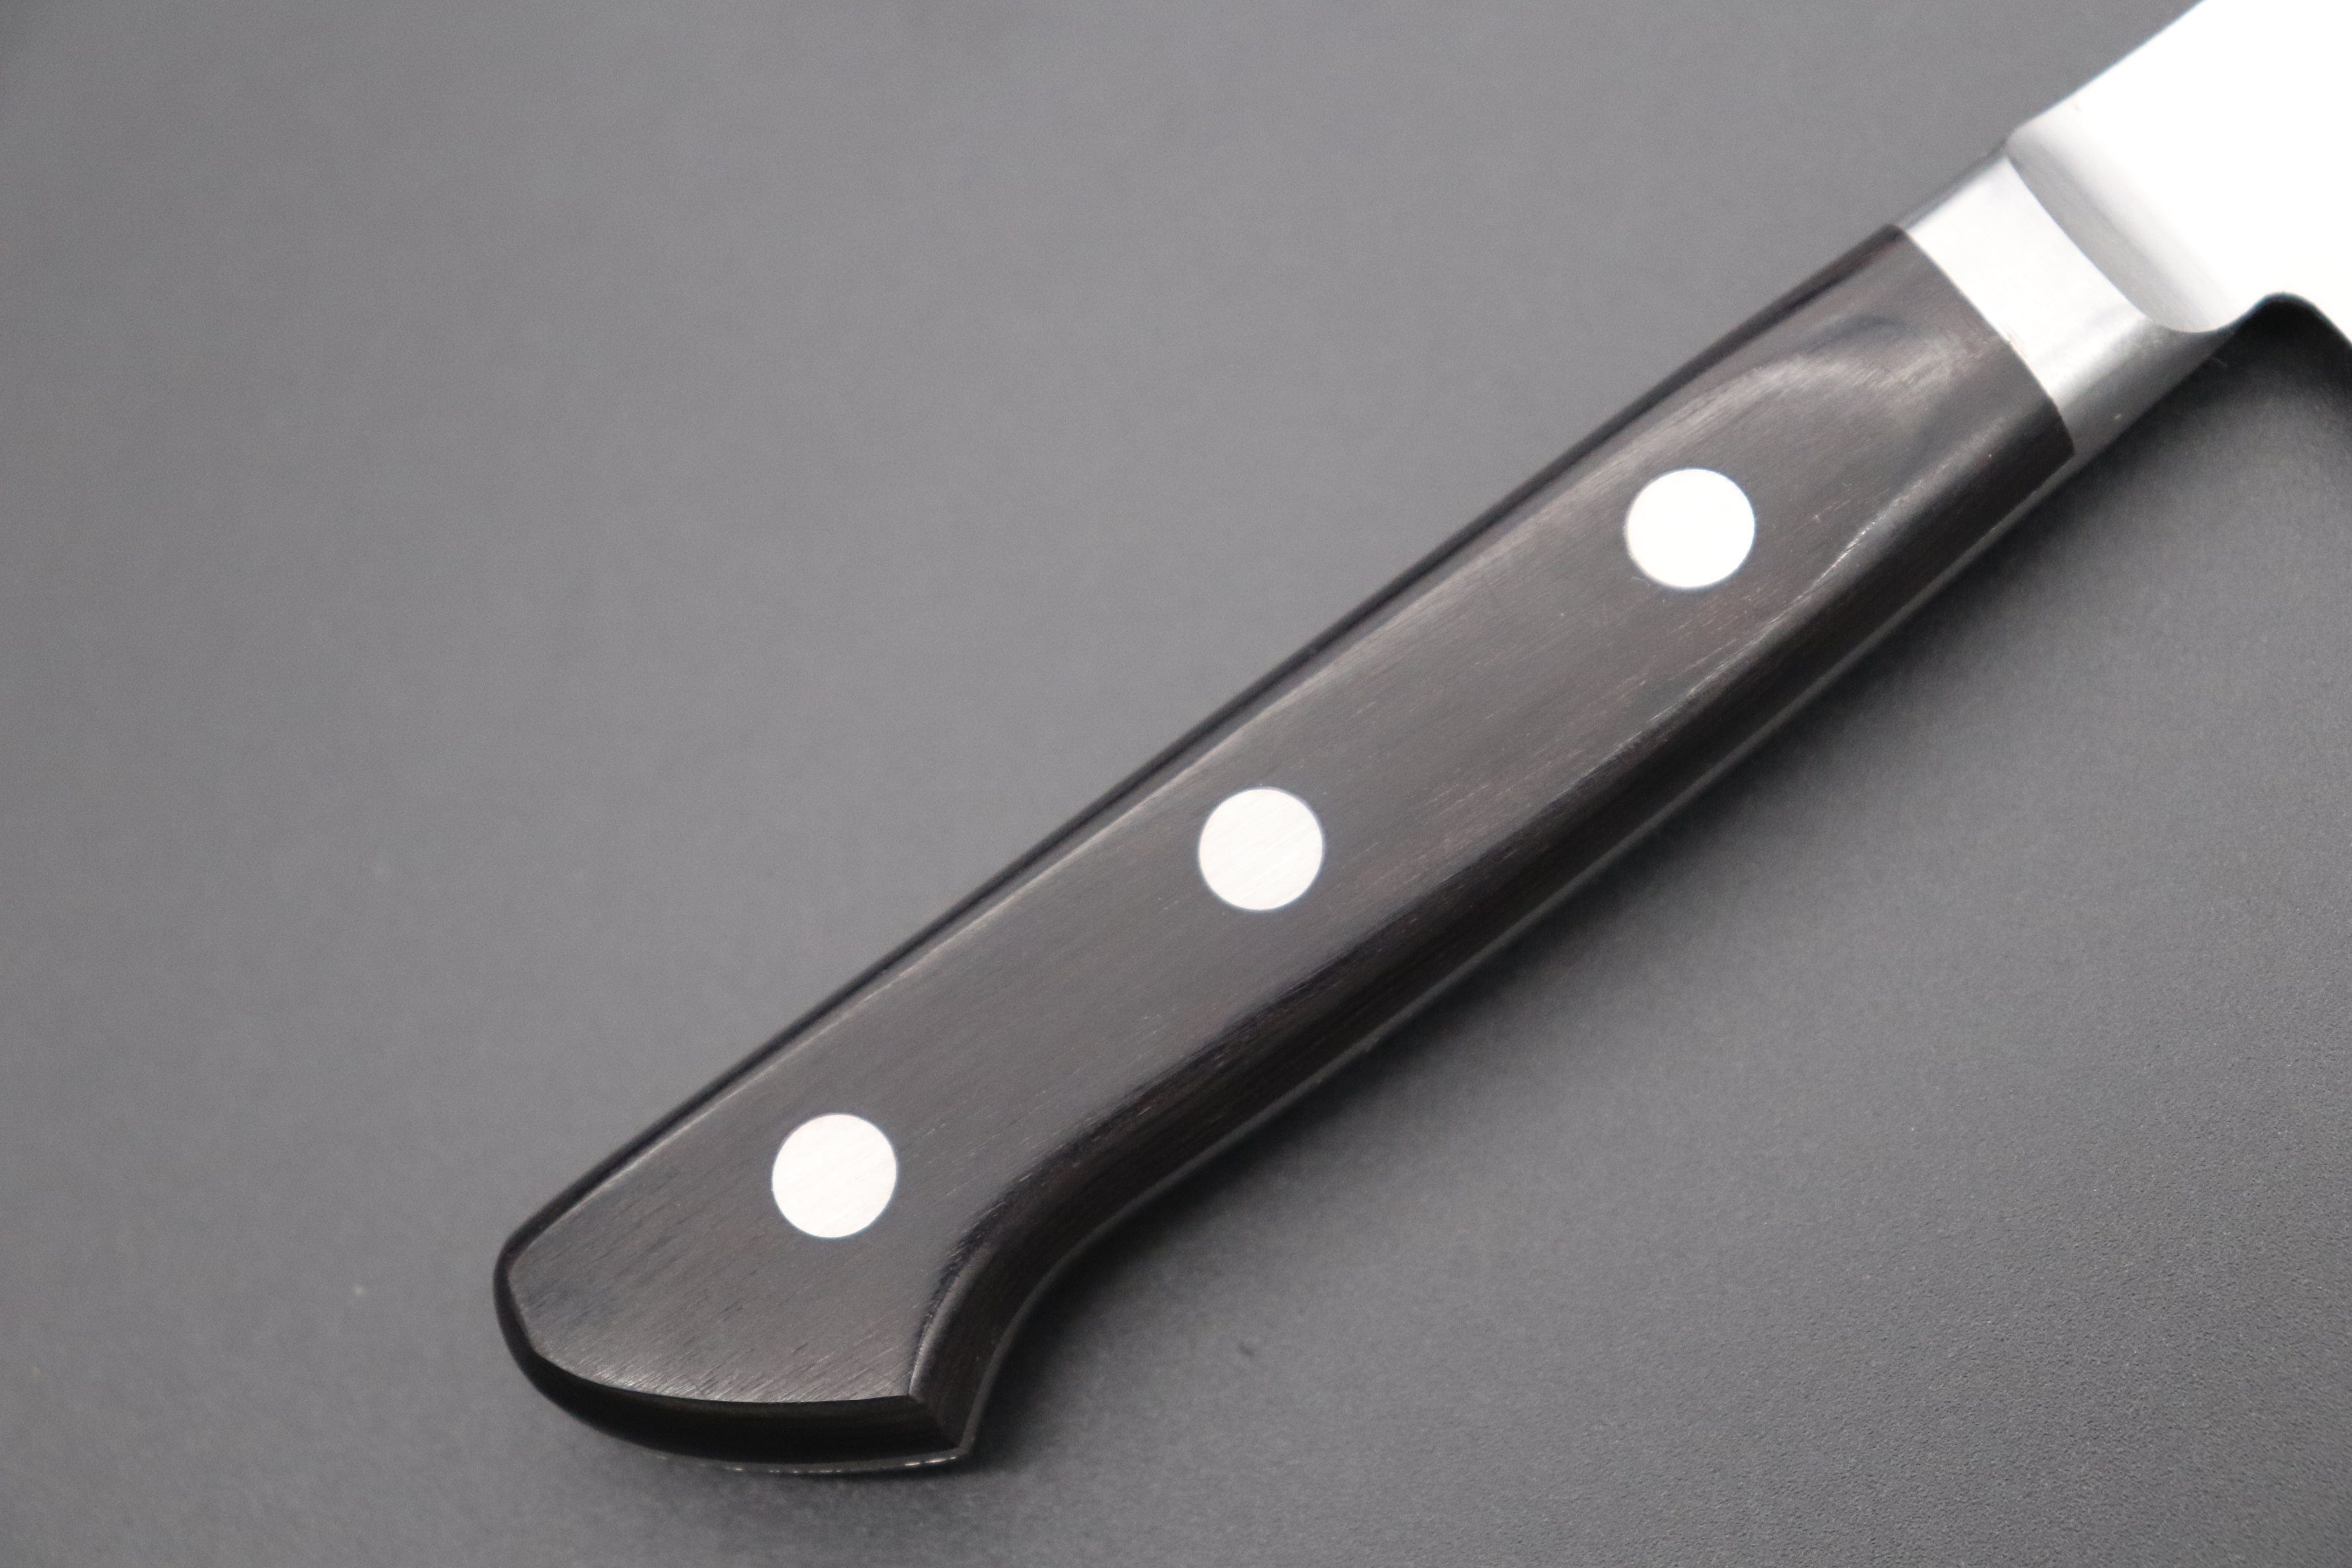 The 9 Best Petty and Kitchen Utility Knives Reviewed in 2020